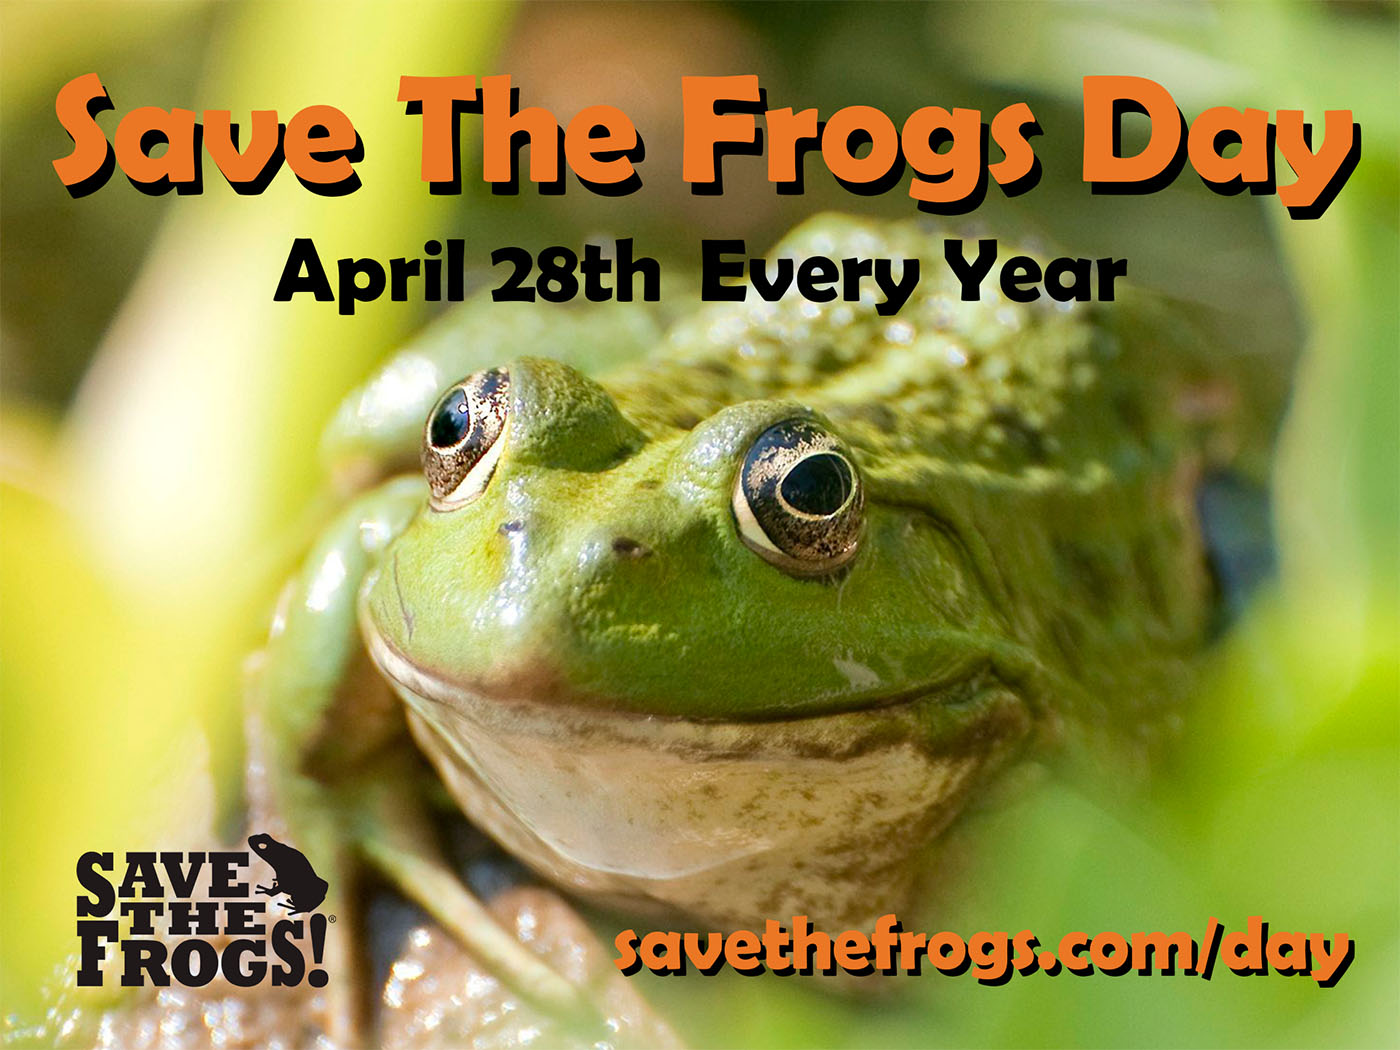 Save The Frogs Day - April 28 Every Year - Amy Liu 1400